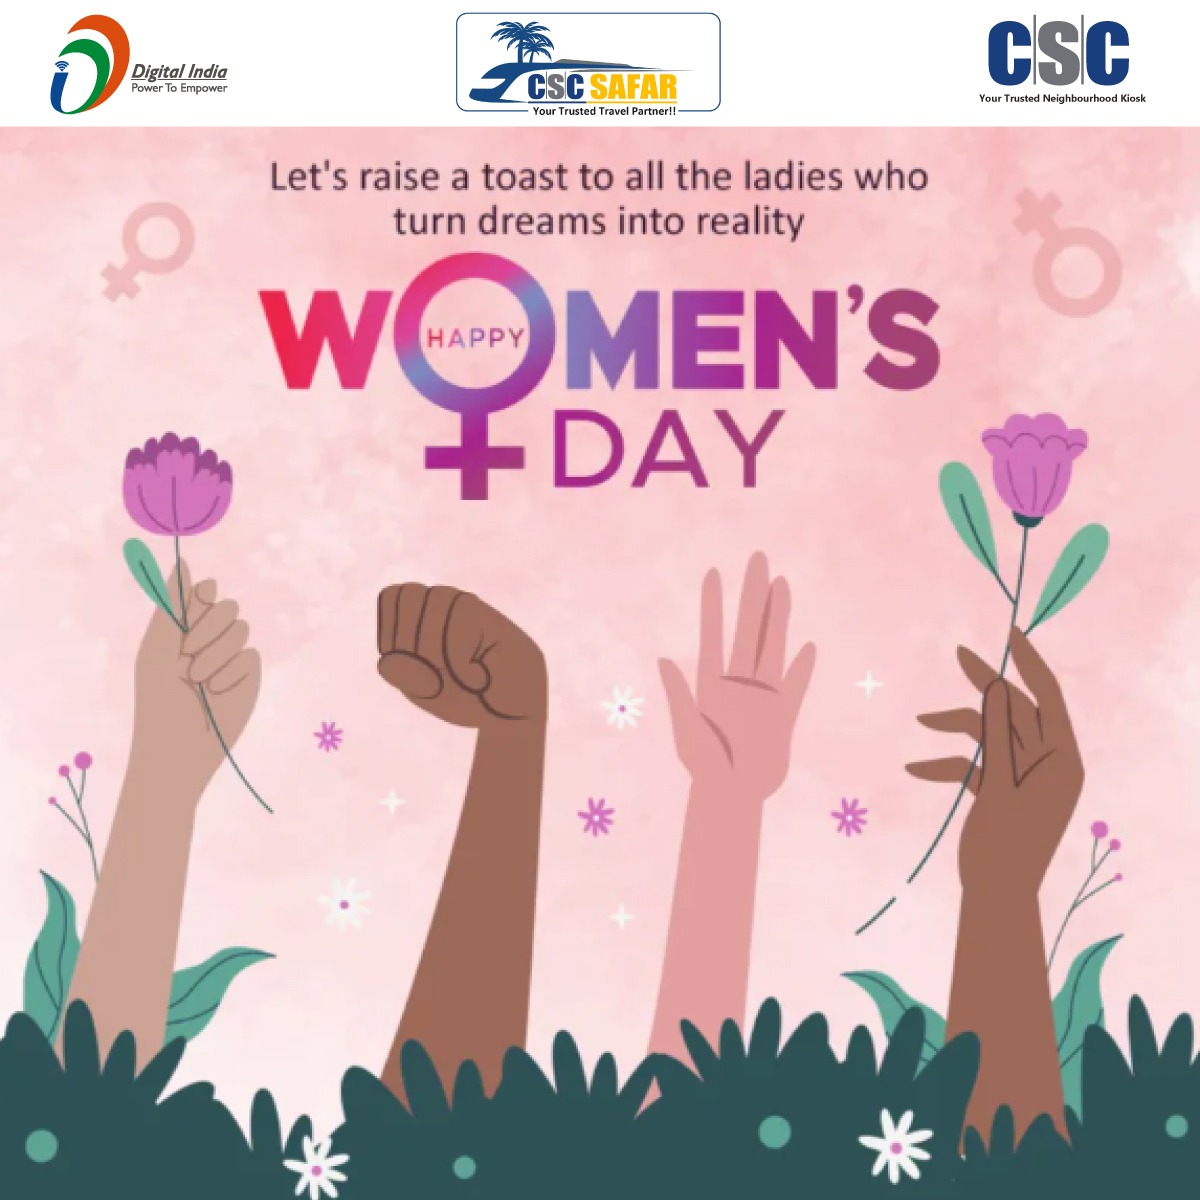 Let's raise a toast to all the ladies who turn dreams into reality. Happy Women's Day. #cscsafar #csc #digitalindia #happywomensday2024 #womensday